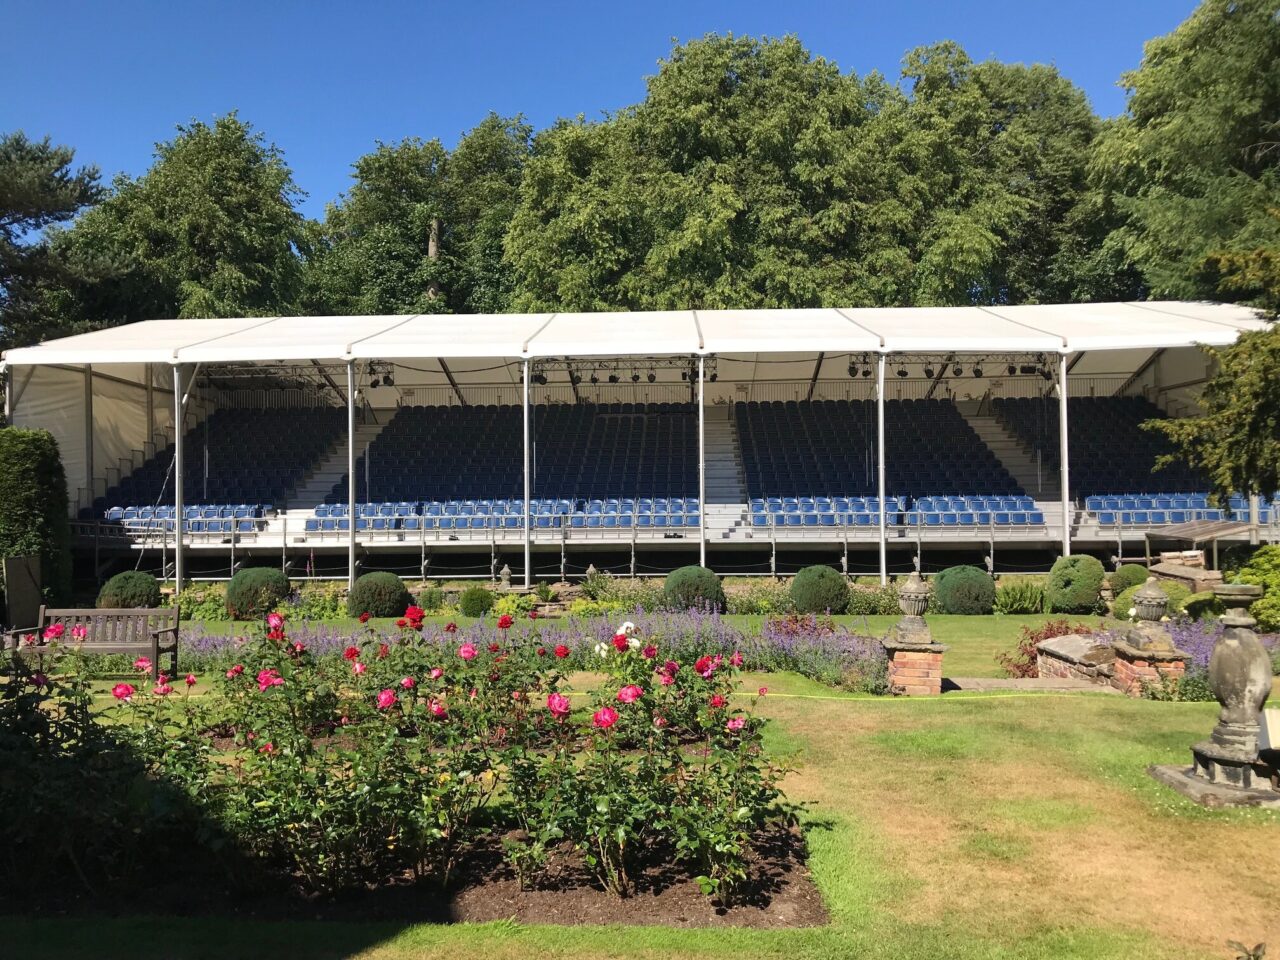 Temporary tiered seating grandstand at Gawsworth, provided by GL events UK